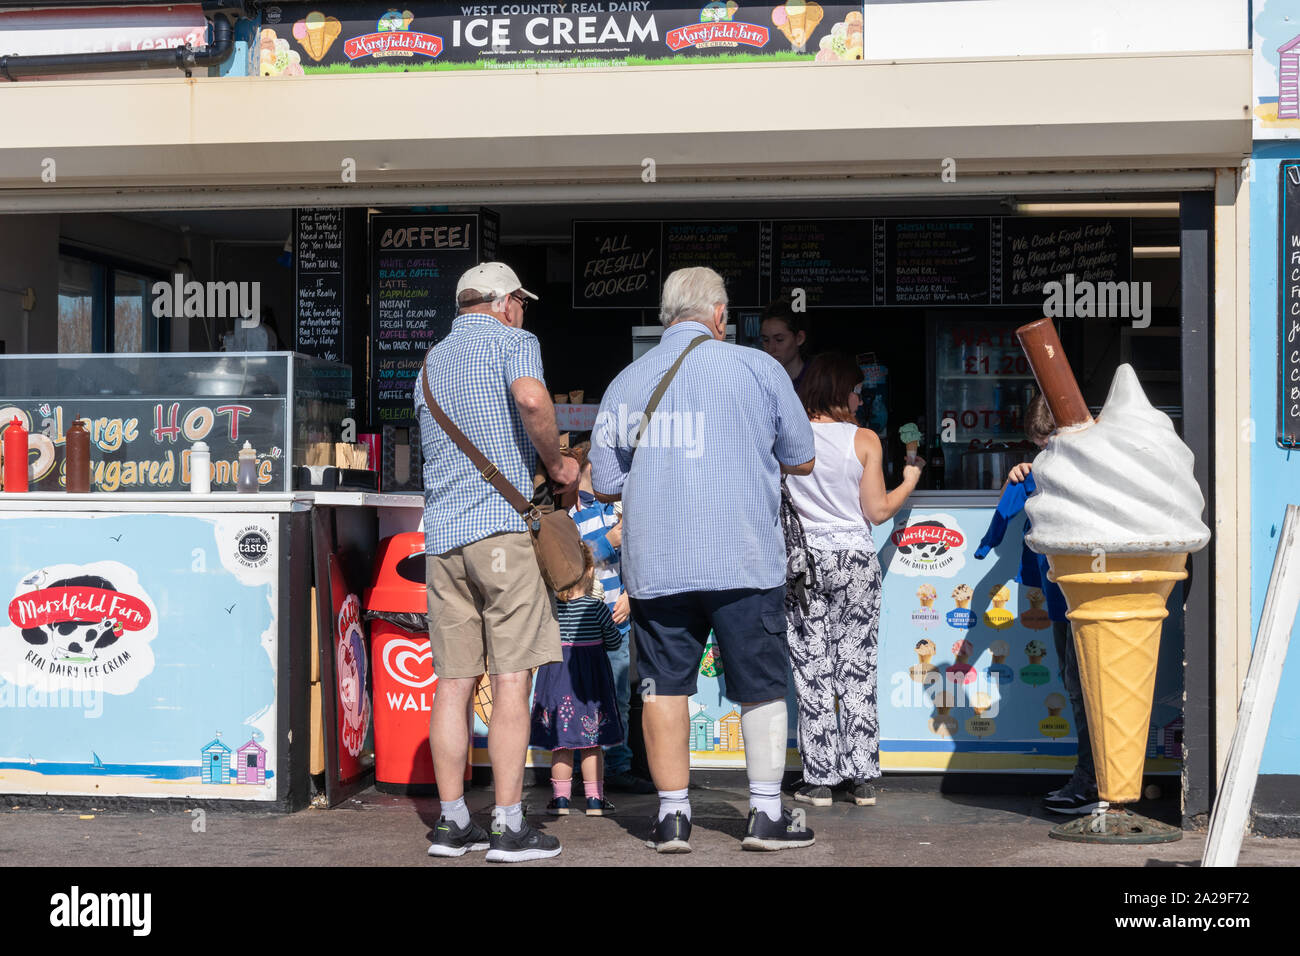 People queuing to buy an ice cream at a seaside food kiosk Stock Photo